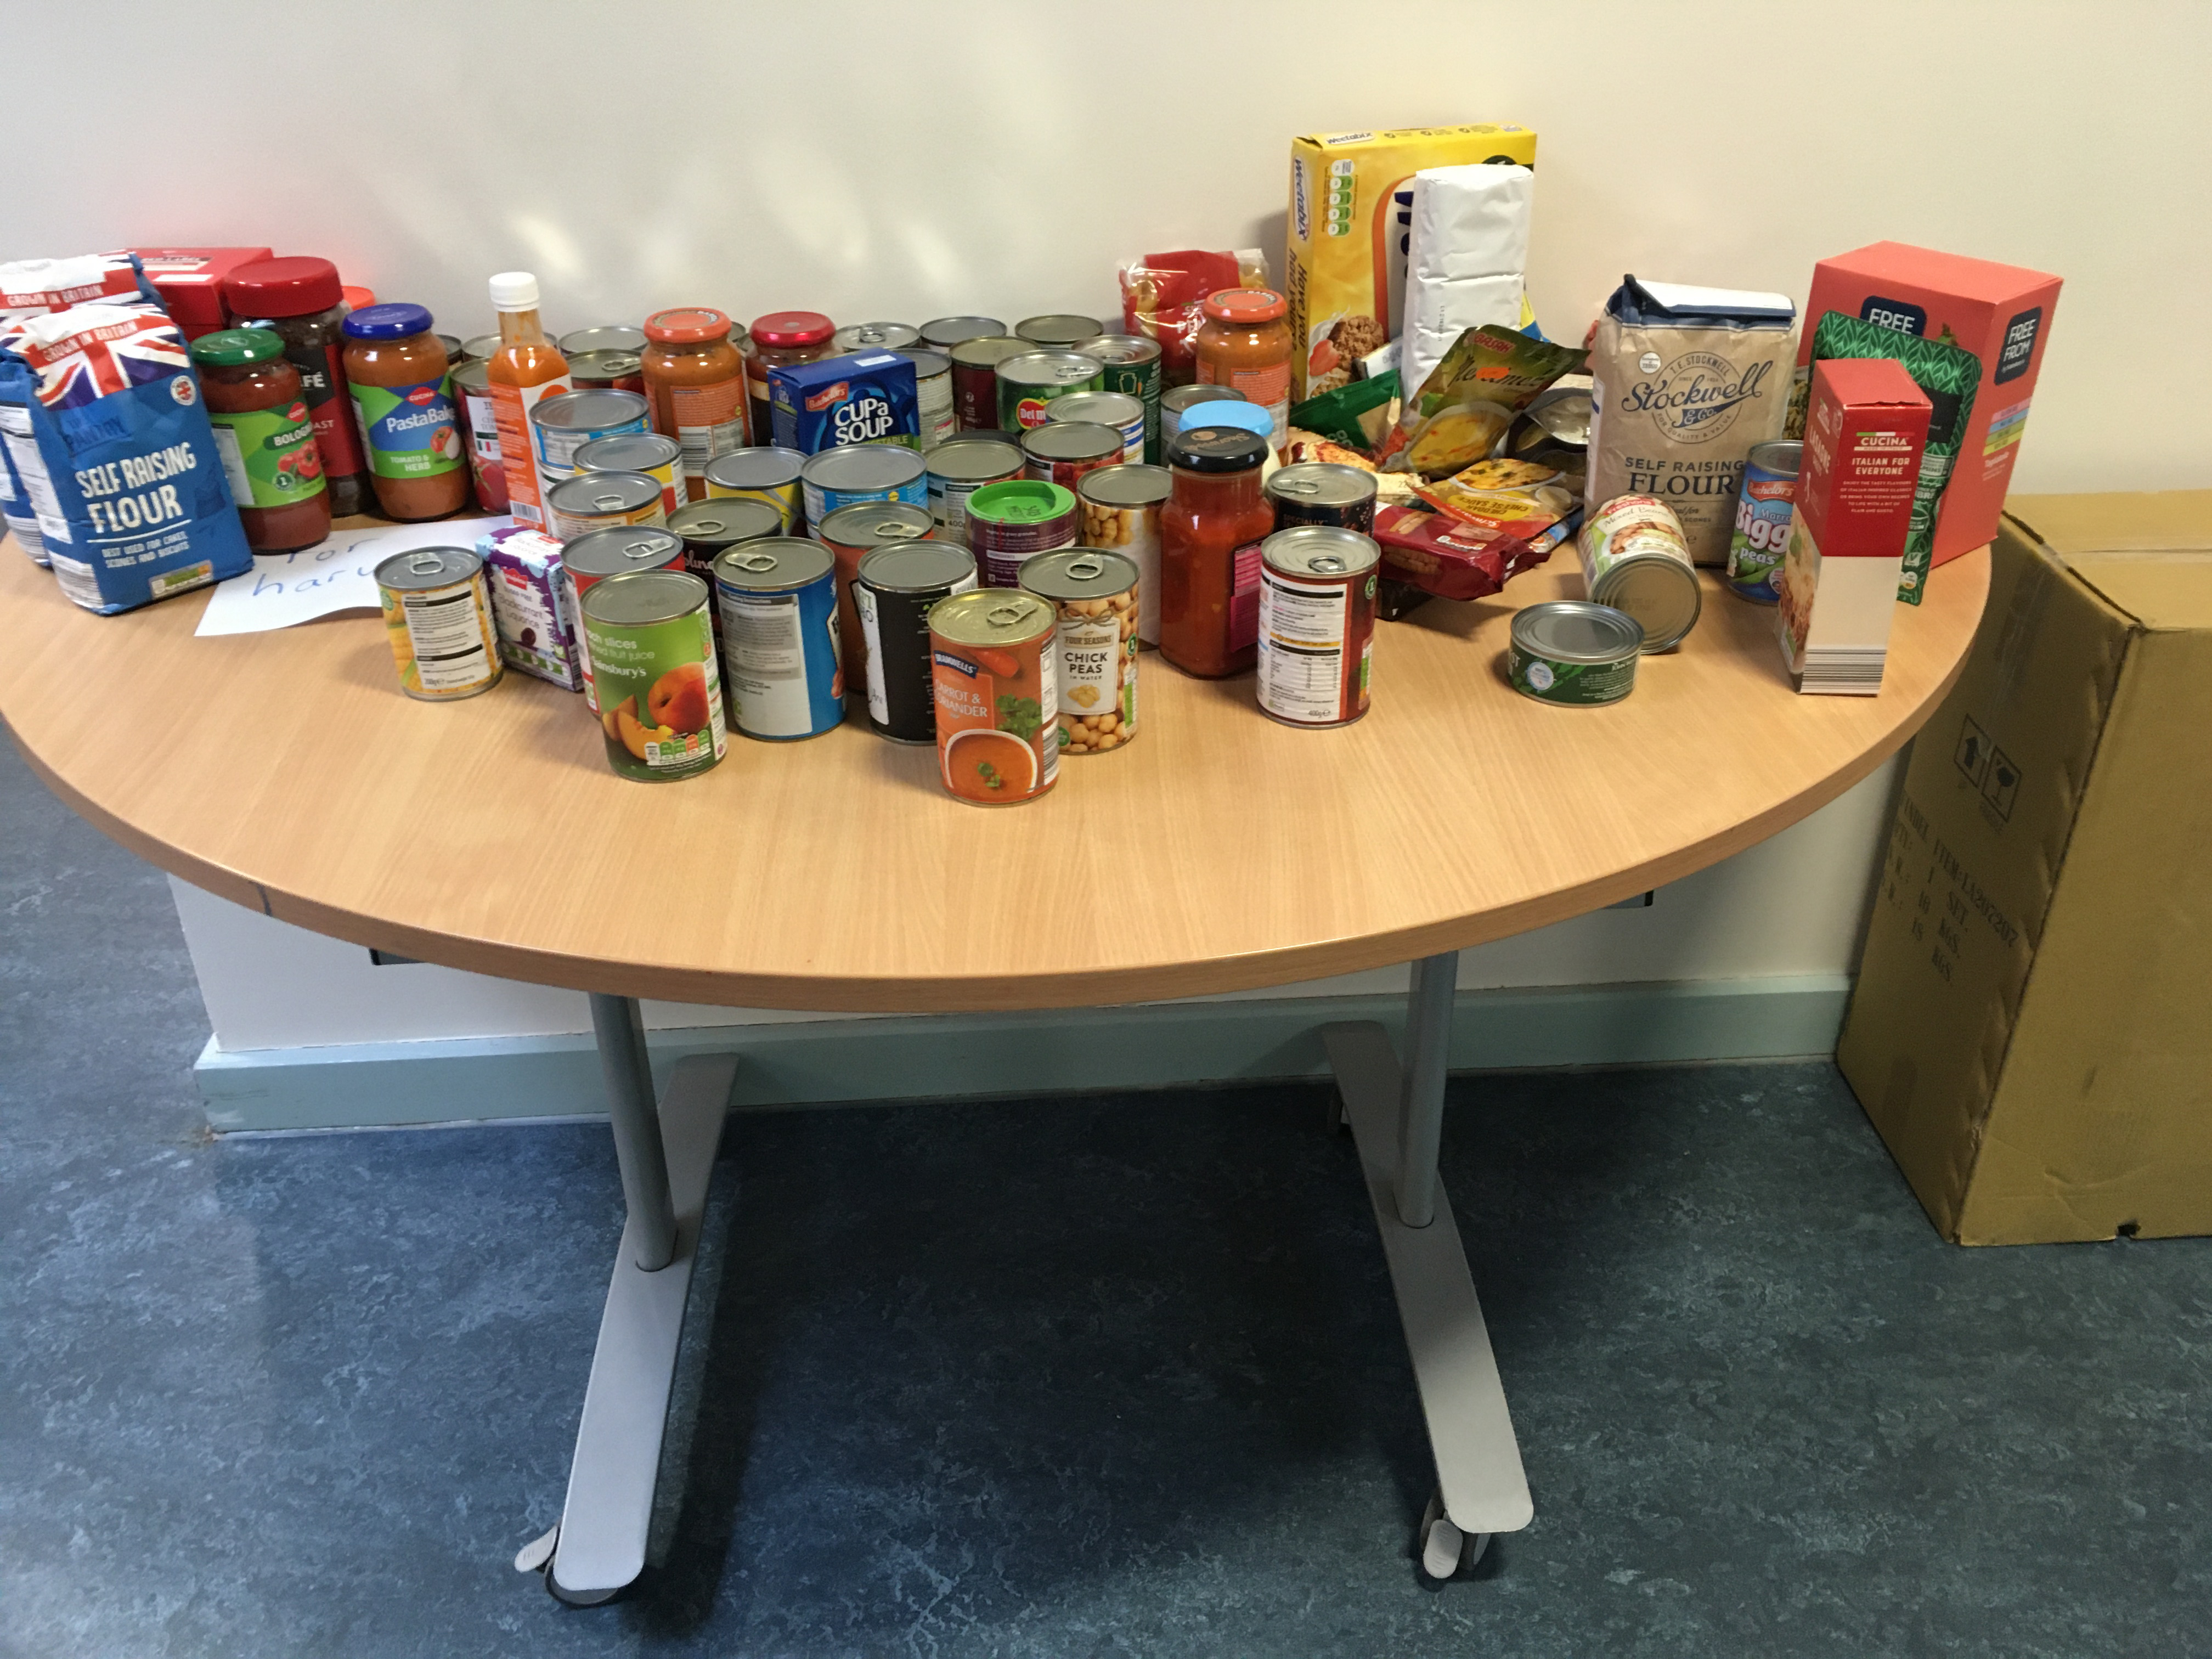 A primary school is collecting donations of food to be distributed to families in need (William Baker/University of Bristol/PA)